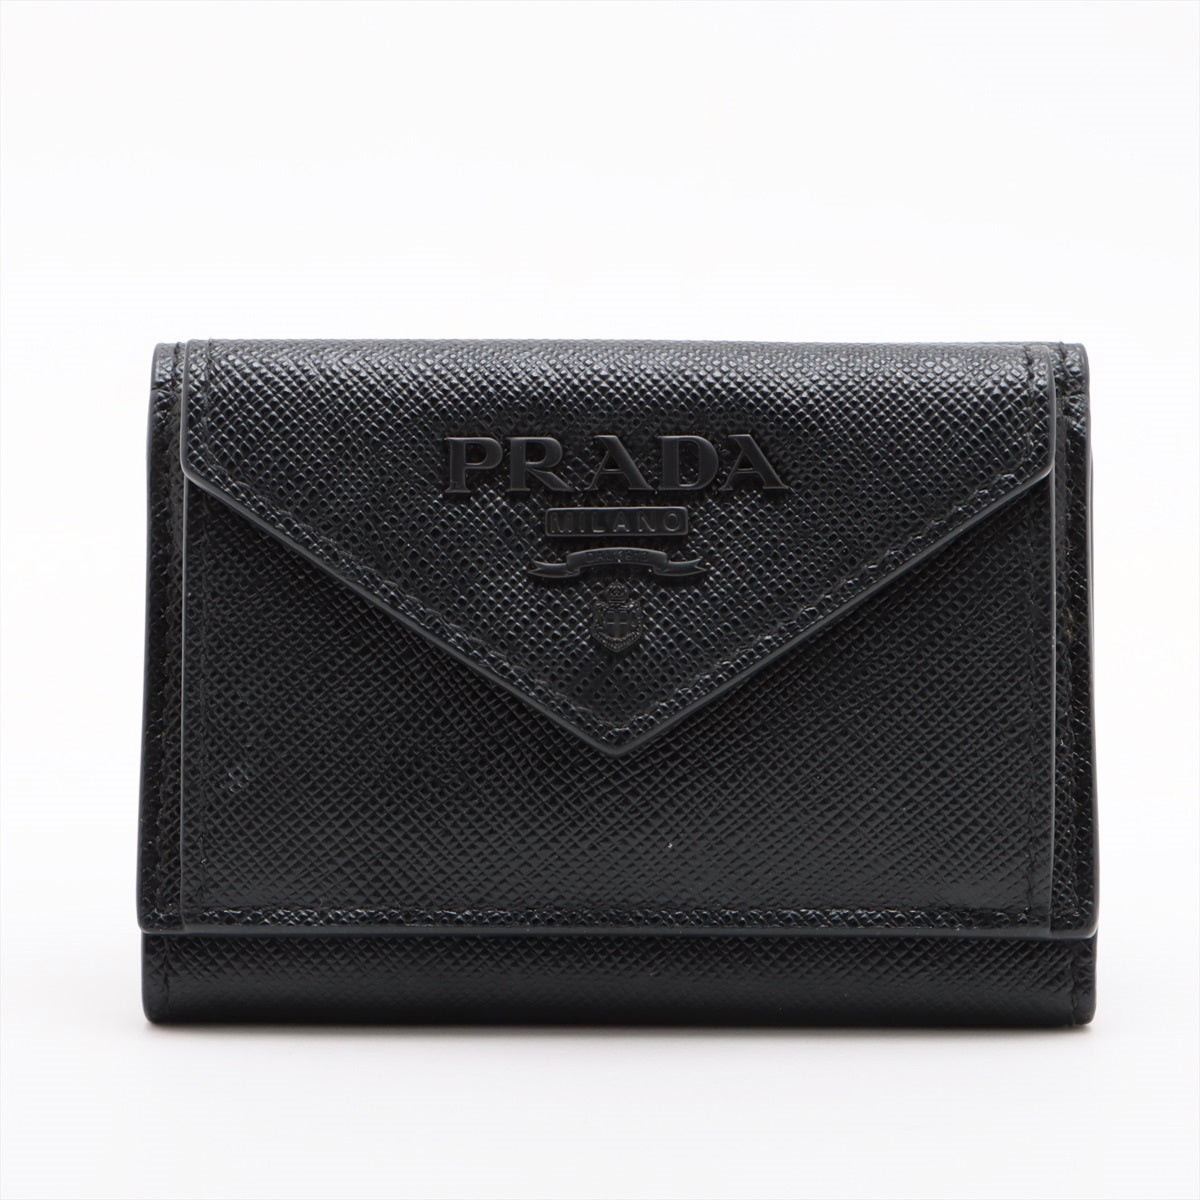 Prada 1MH021 Leather Compact Wallet Black